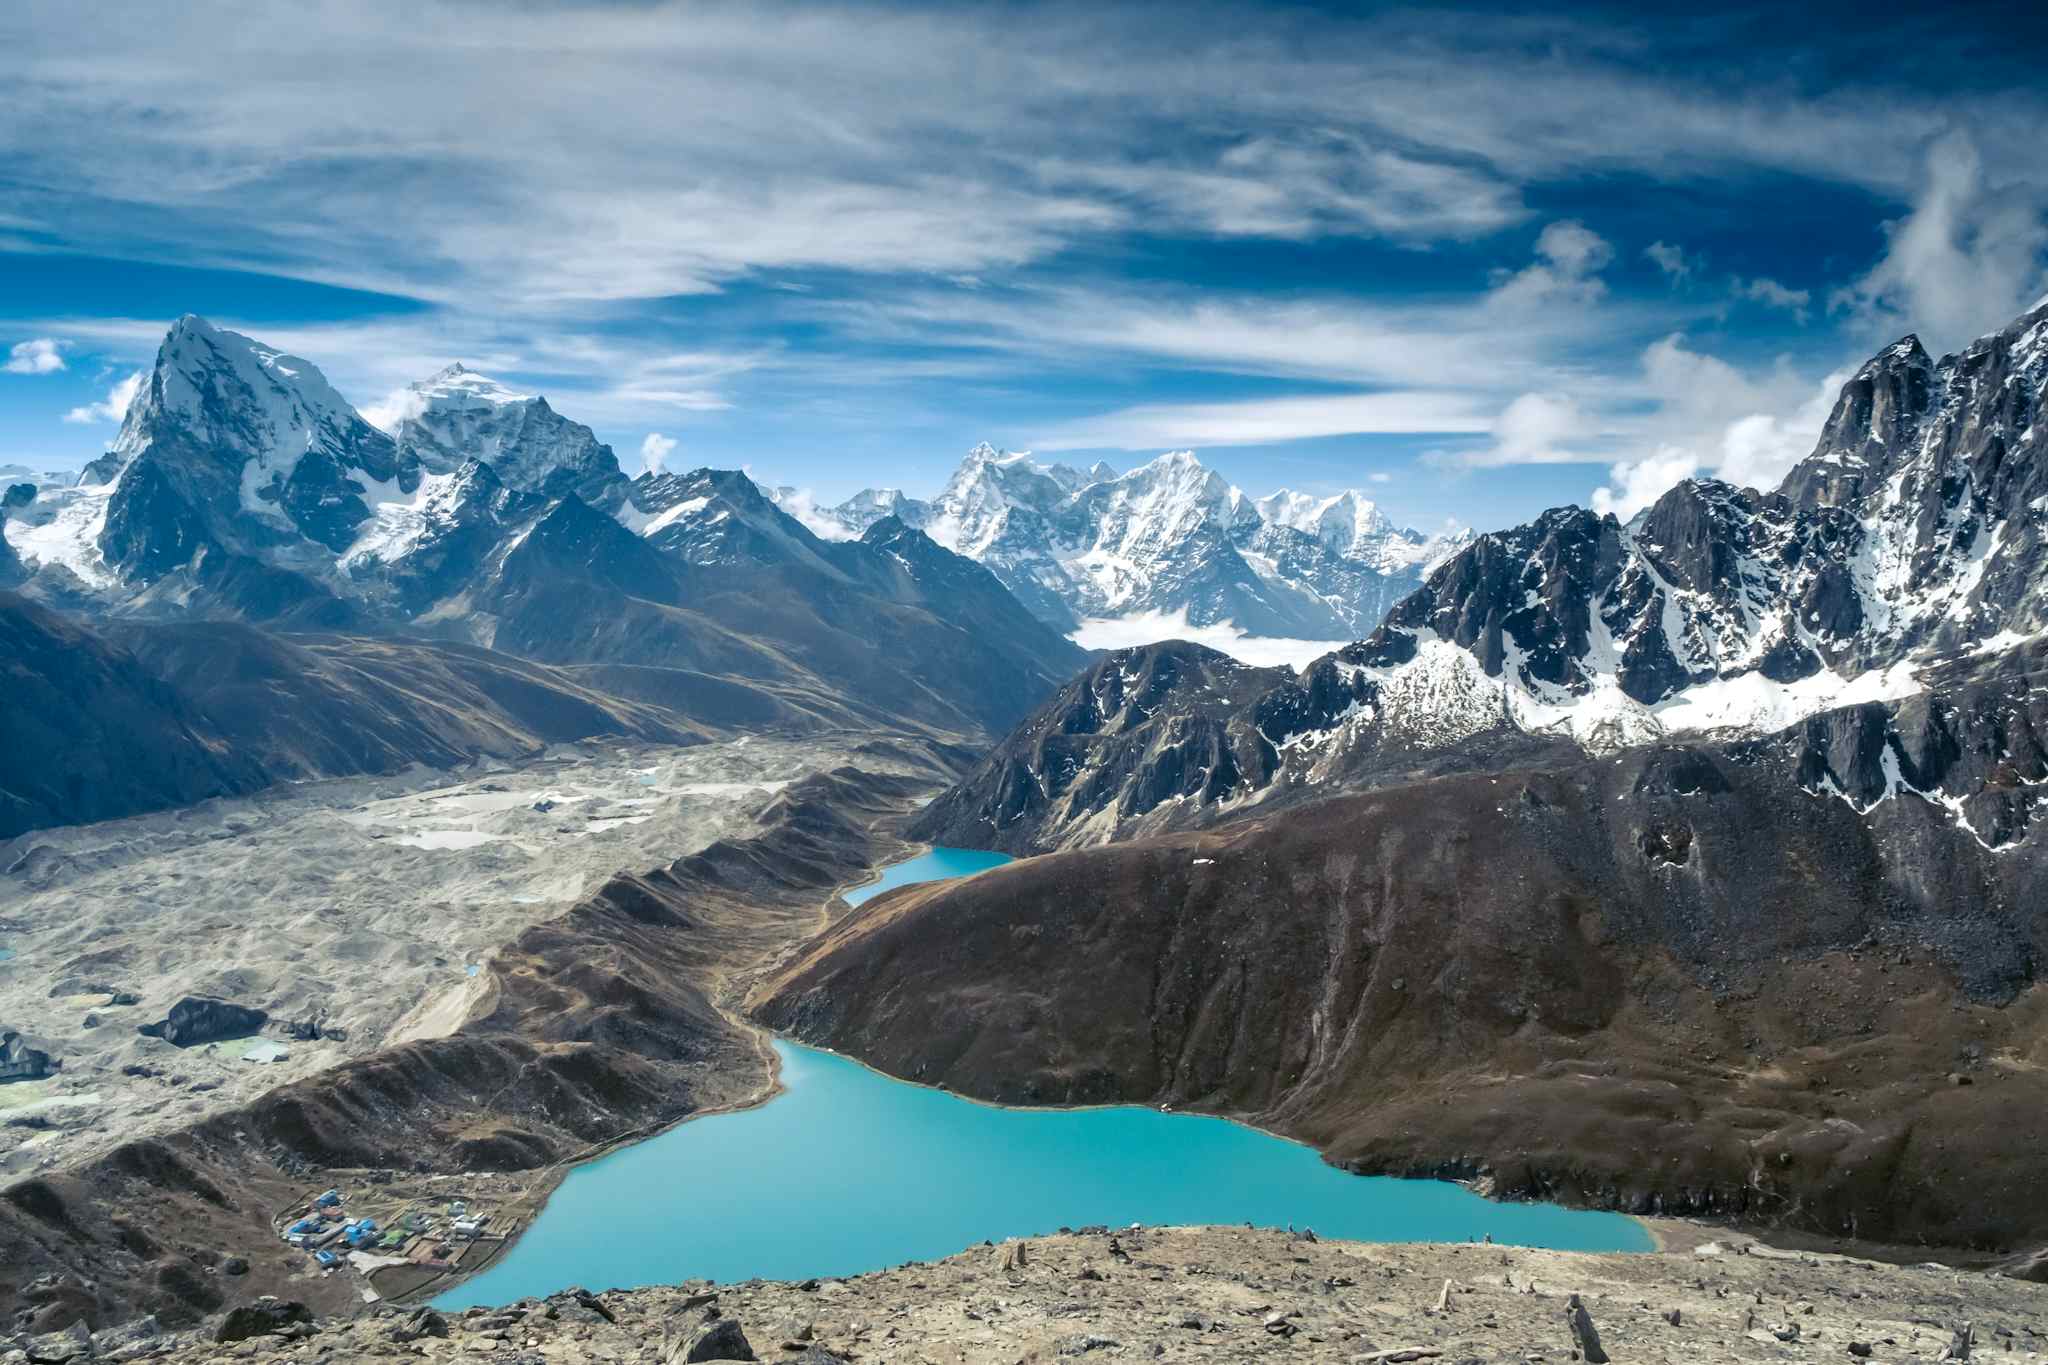 Gokyo Lakes vs. Everest Base Camp: What's the Difference?